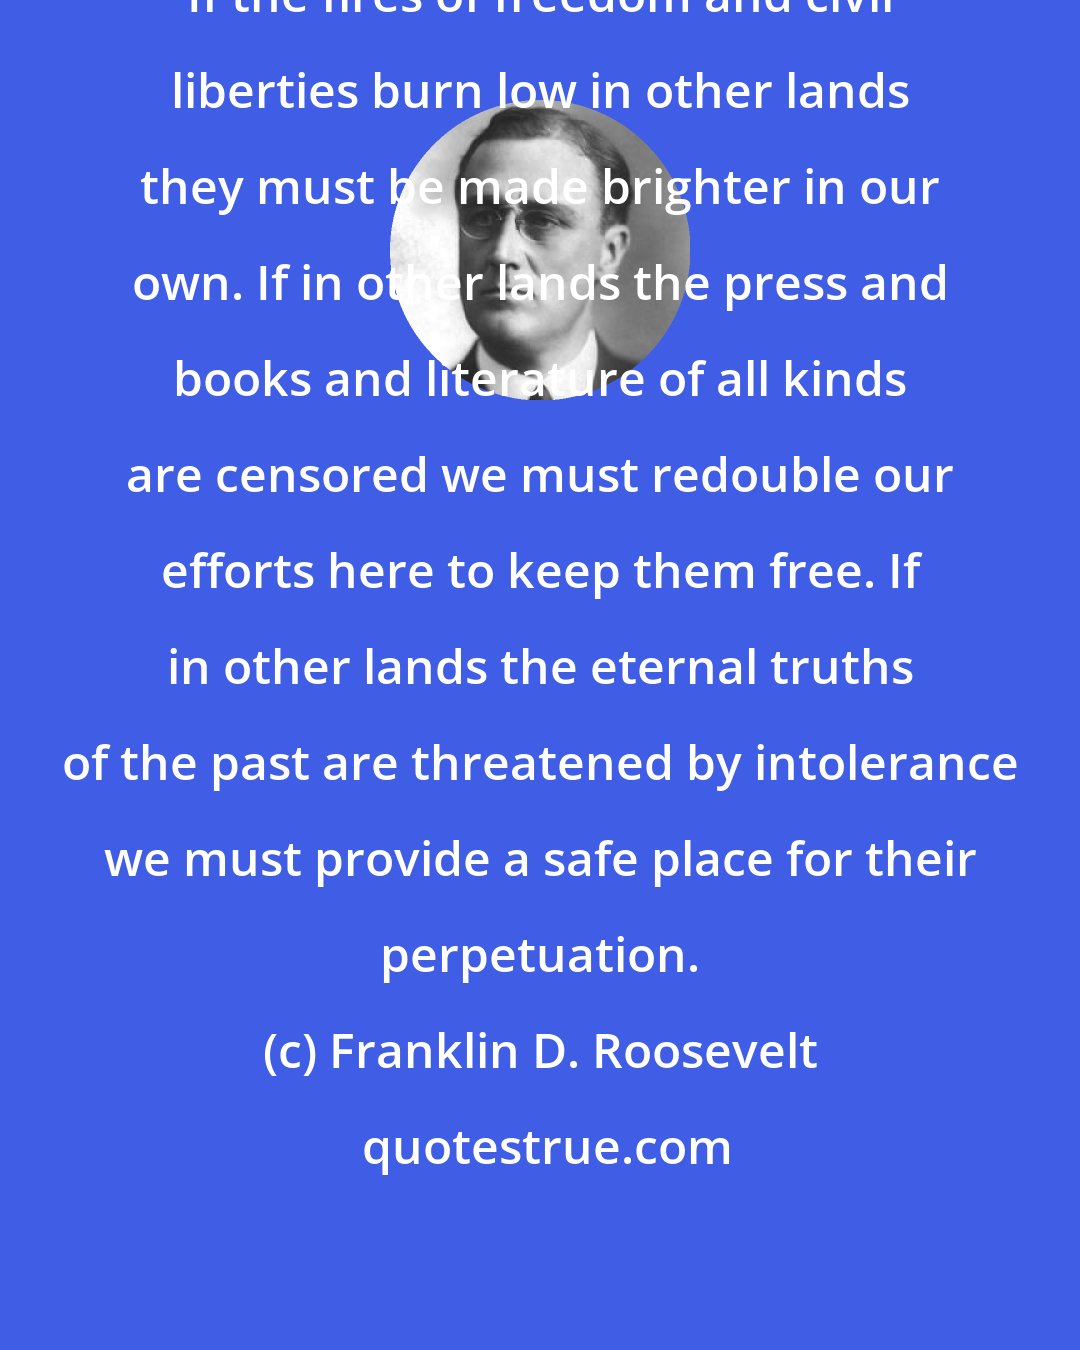 Franklin D. Roosevelt: If the fires of freedom and civil liberties burn low in other lands they must be made brighter in our own. If in other lands the press and books and literature of all kinds are censored we must redouble our efforts here to keep them free. If in other lands the eternal truths of the past are threatened by intolerance we must provide a safe place for their perpetuation.